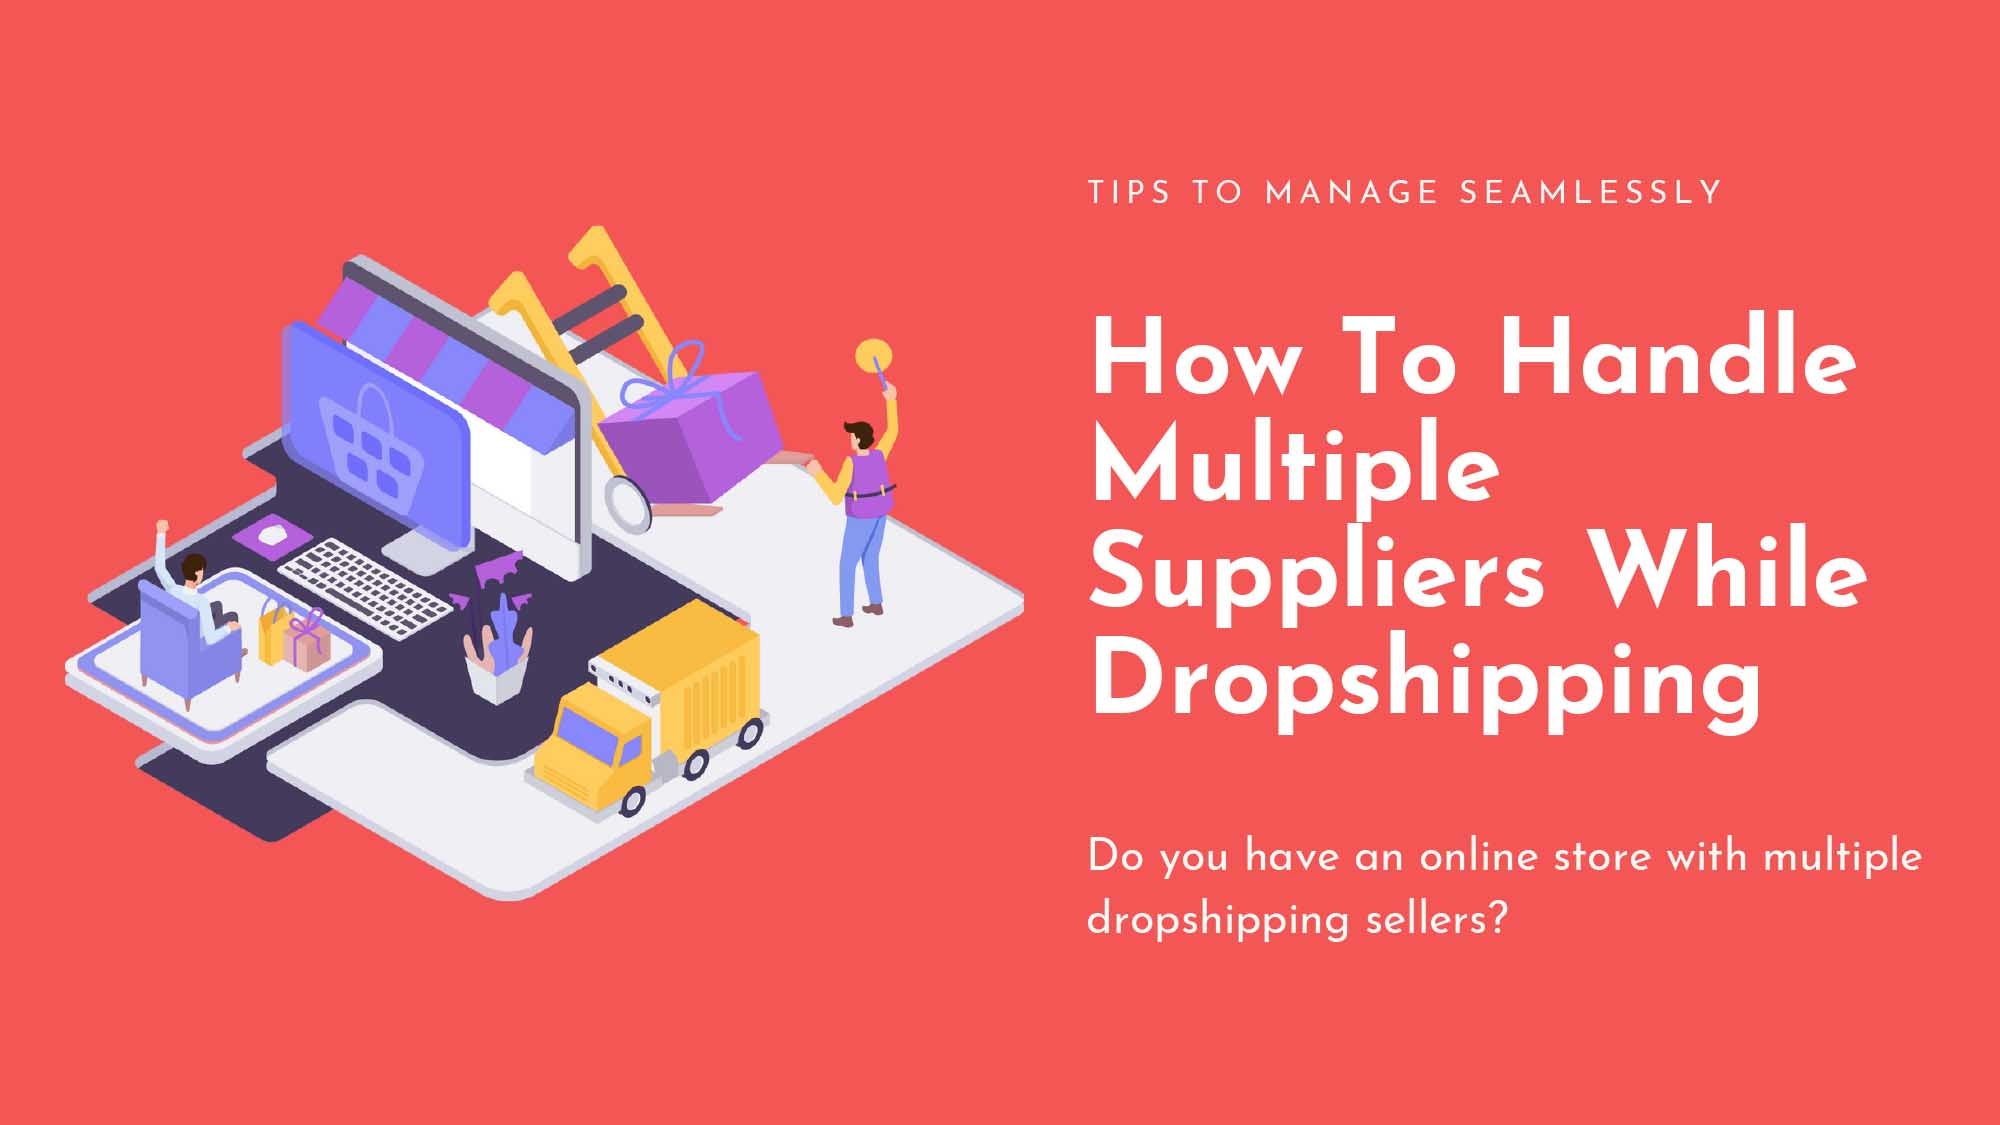 Dropshipping With Multiple Sellers: Tips To Manage Seamlessly